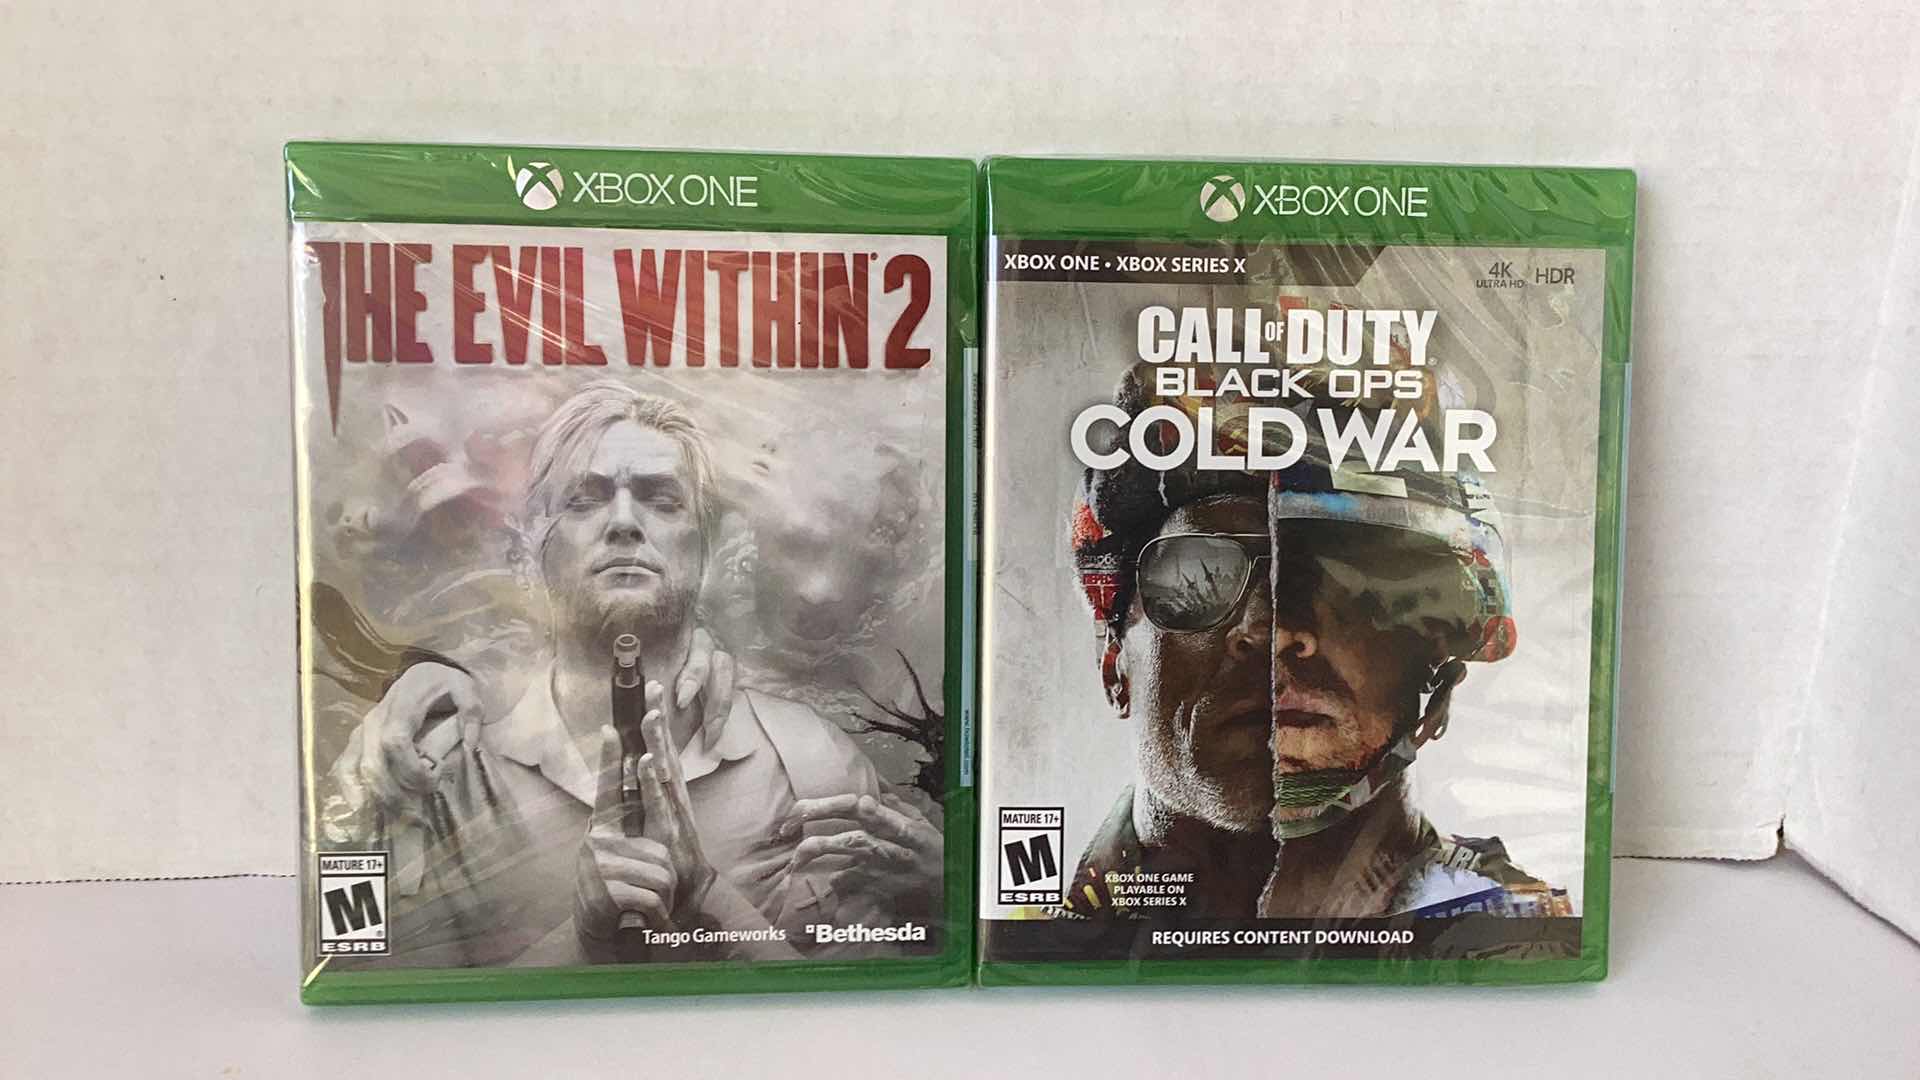 Photo 1 of 2 NEW X-BOX GAMES: THE EVIL WITHIN 2 AND CALL OF DUTY BLACK OPS COLD WAR